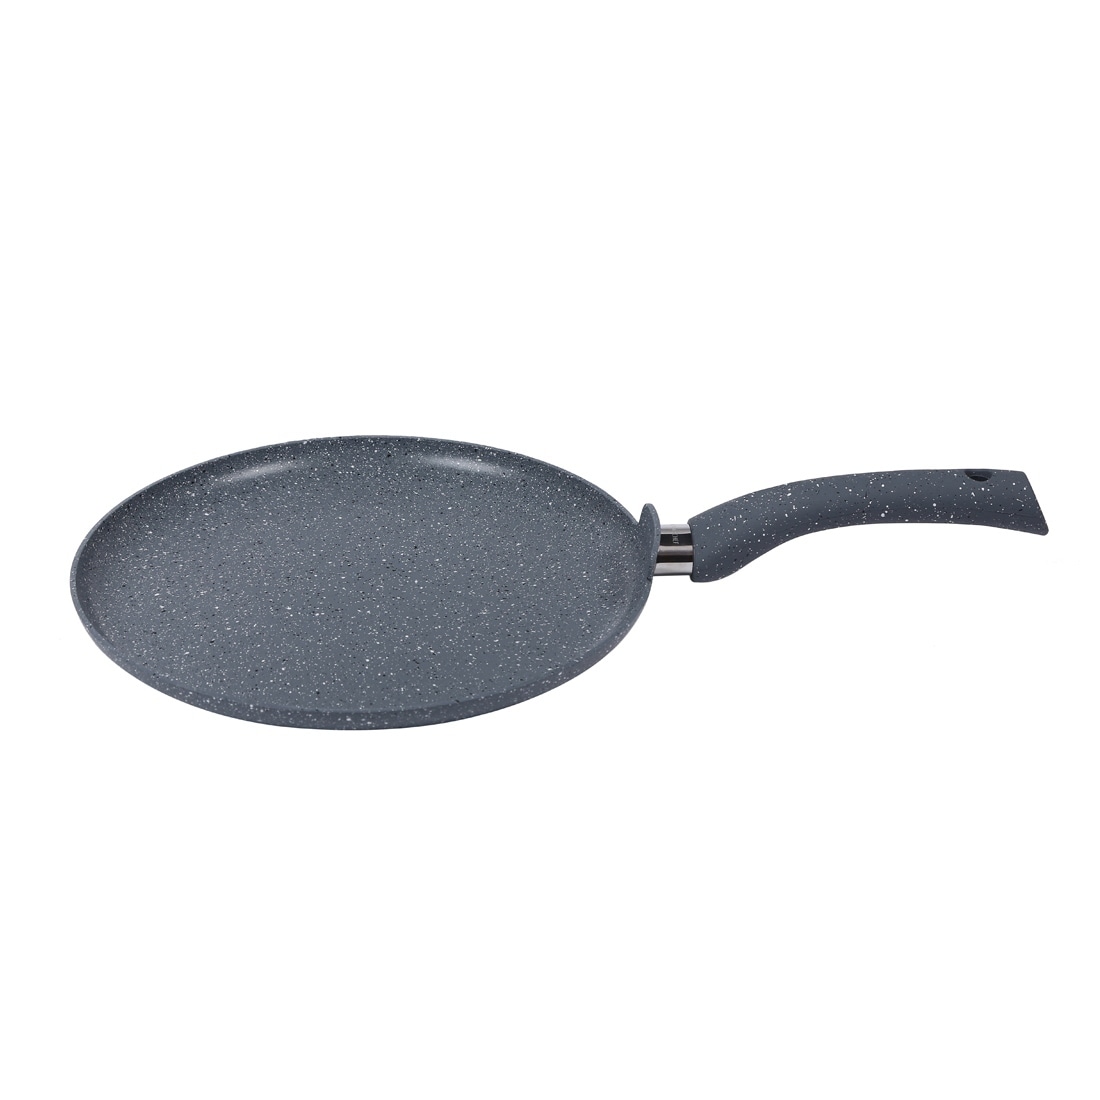 https://ak1.ostkcdn.com/images/products/30794602/Granite-Forged-Non-Stick-and-Indian-Cooking-Dosa-Tawa-Crepe-Pan-24-cm-24-cm-9e923e05-9165-48d4-a5c5-c7116199387b.jpg